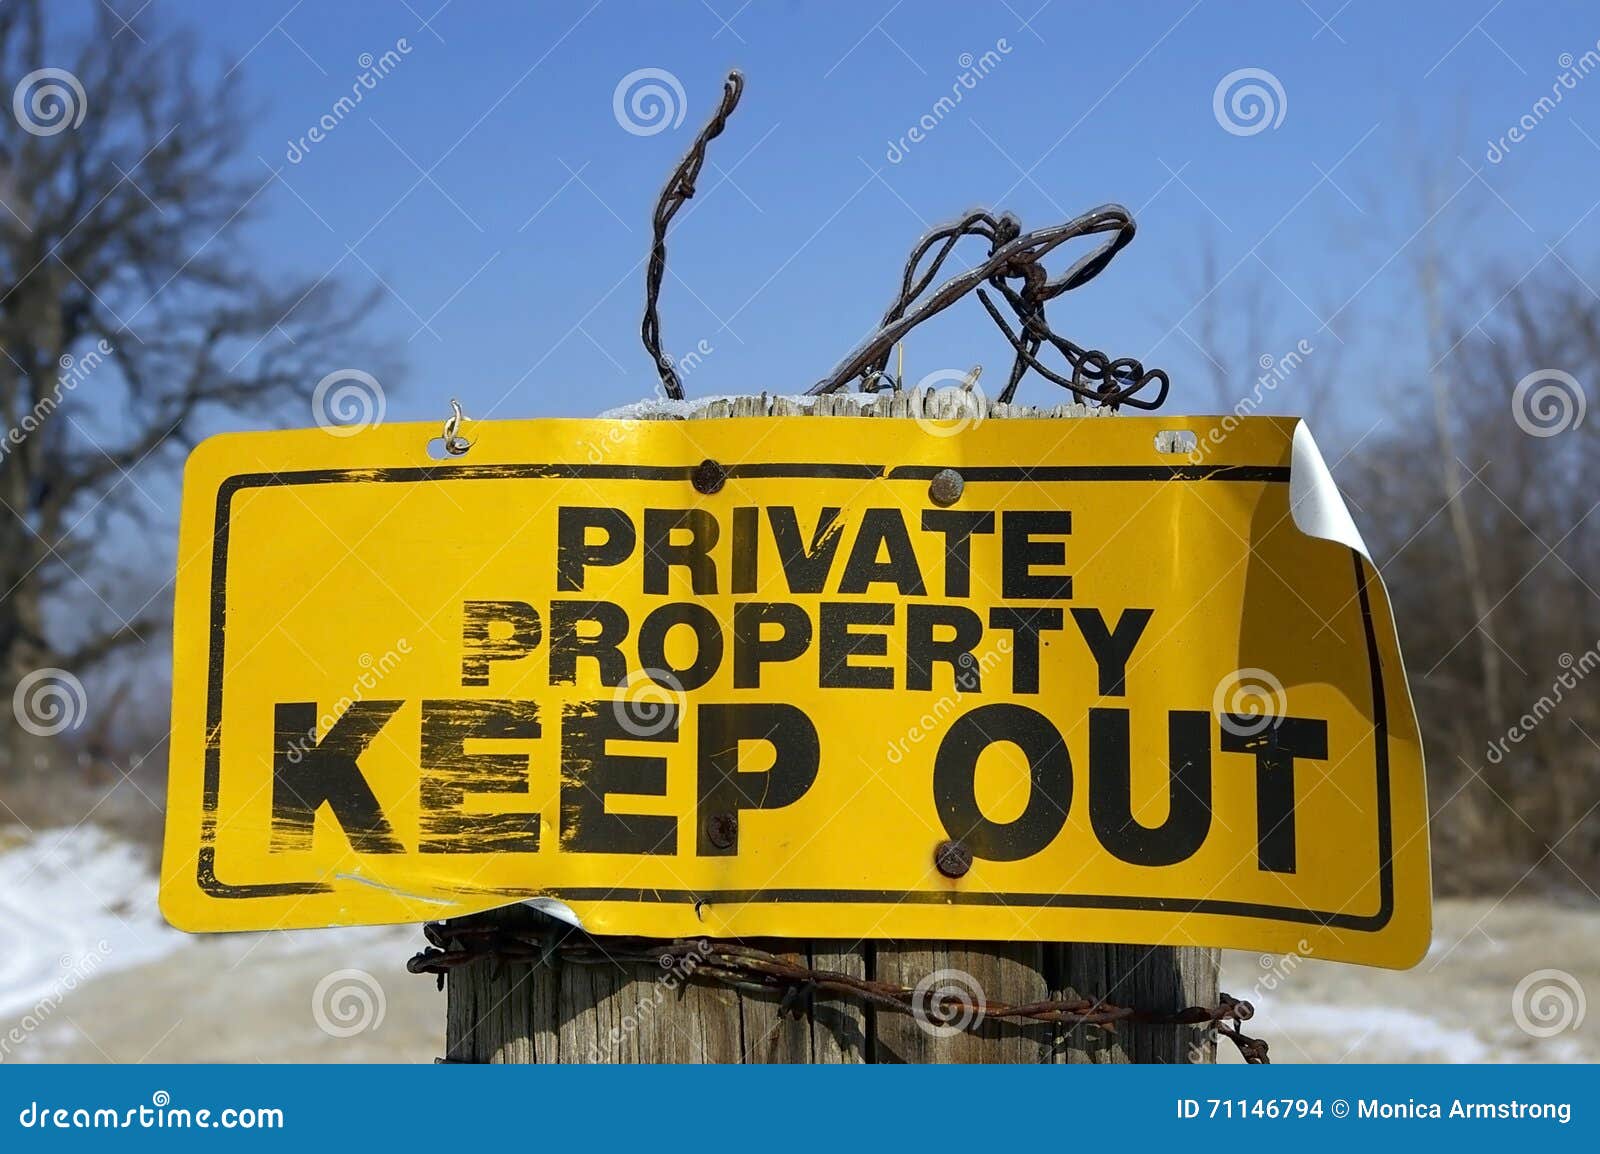 Private property. Private property sign. Private property keep out. The right to private property. Abolition of private property.